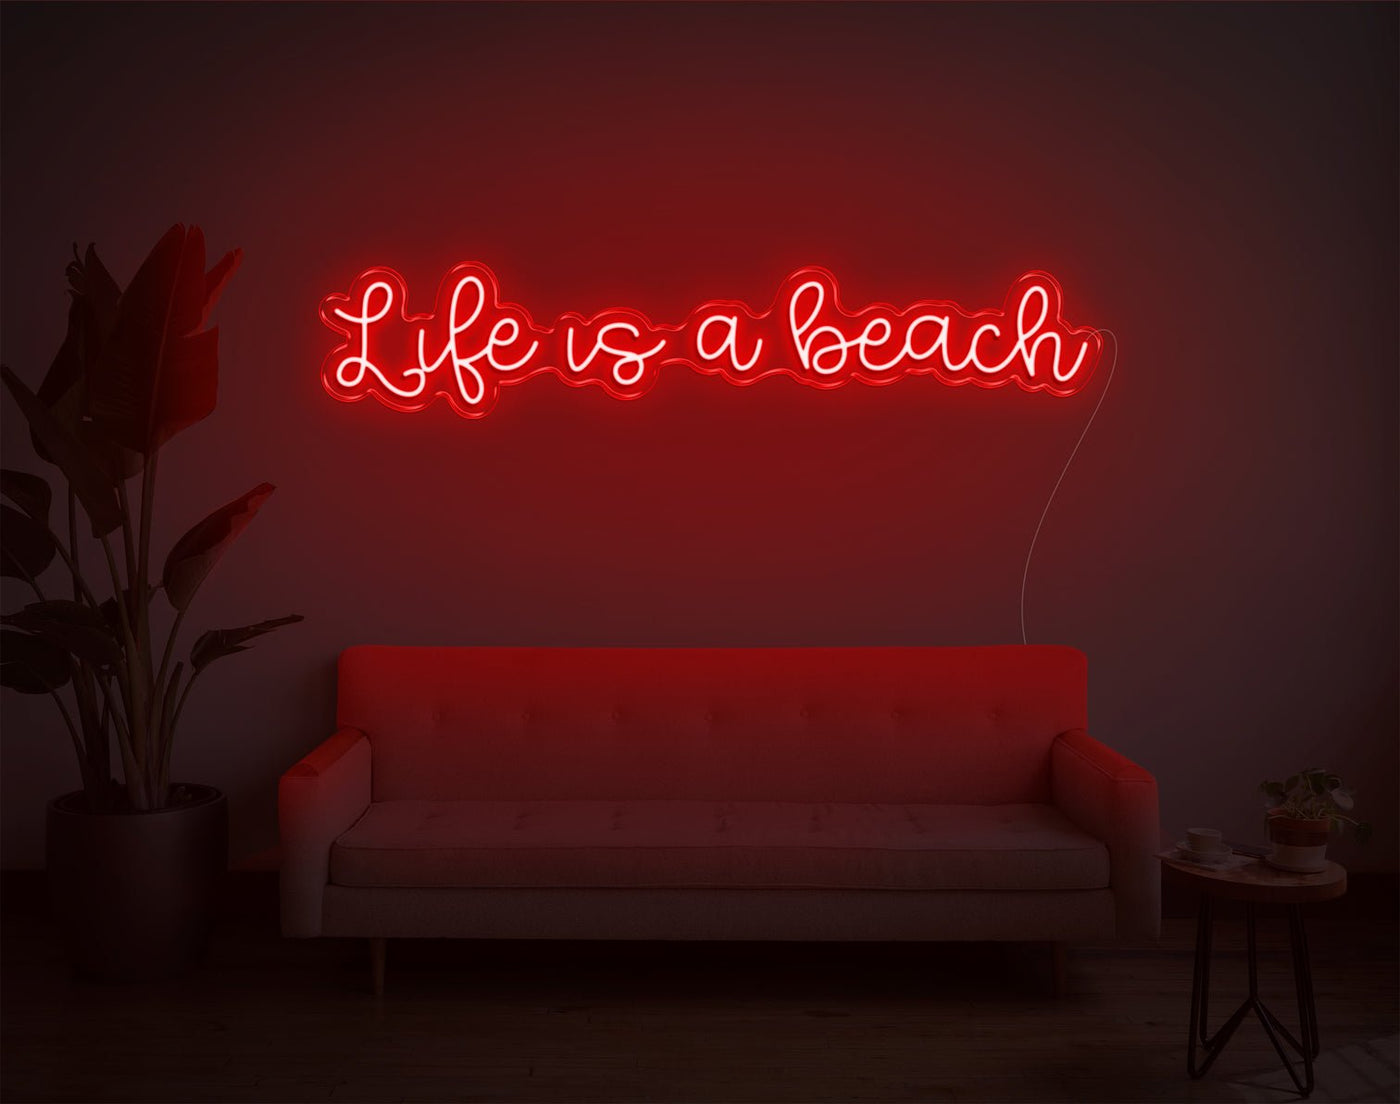 Life is a beach LED Neon Sign - 28inch x 7inchRed